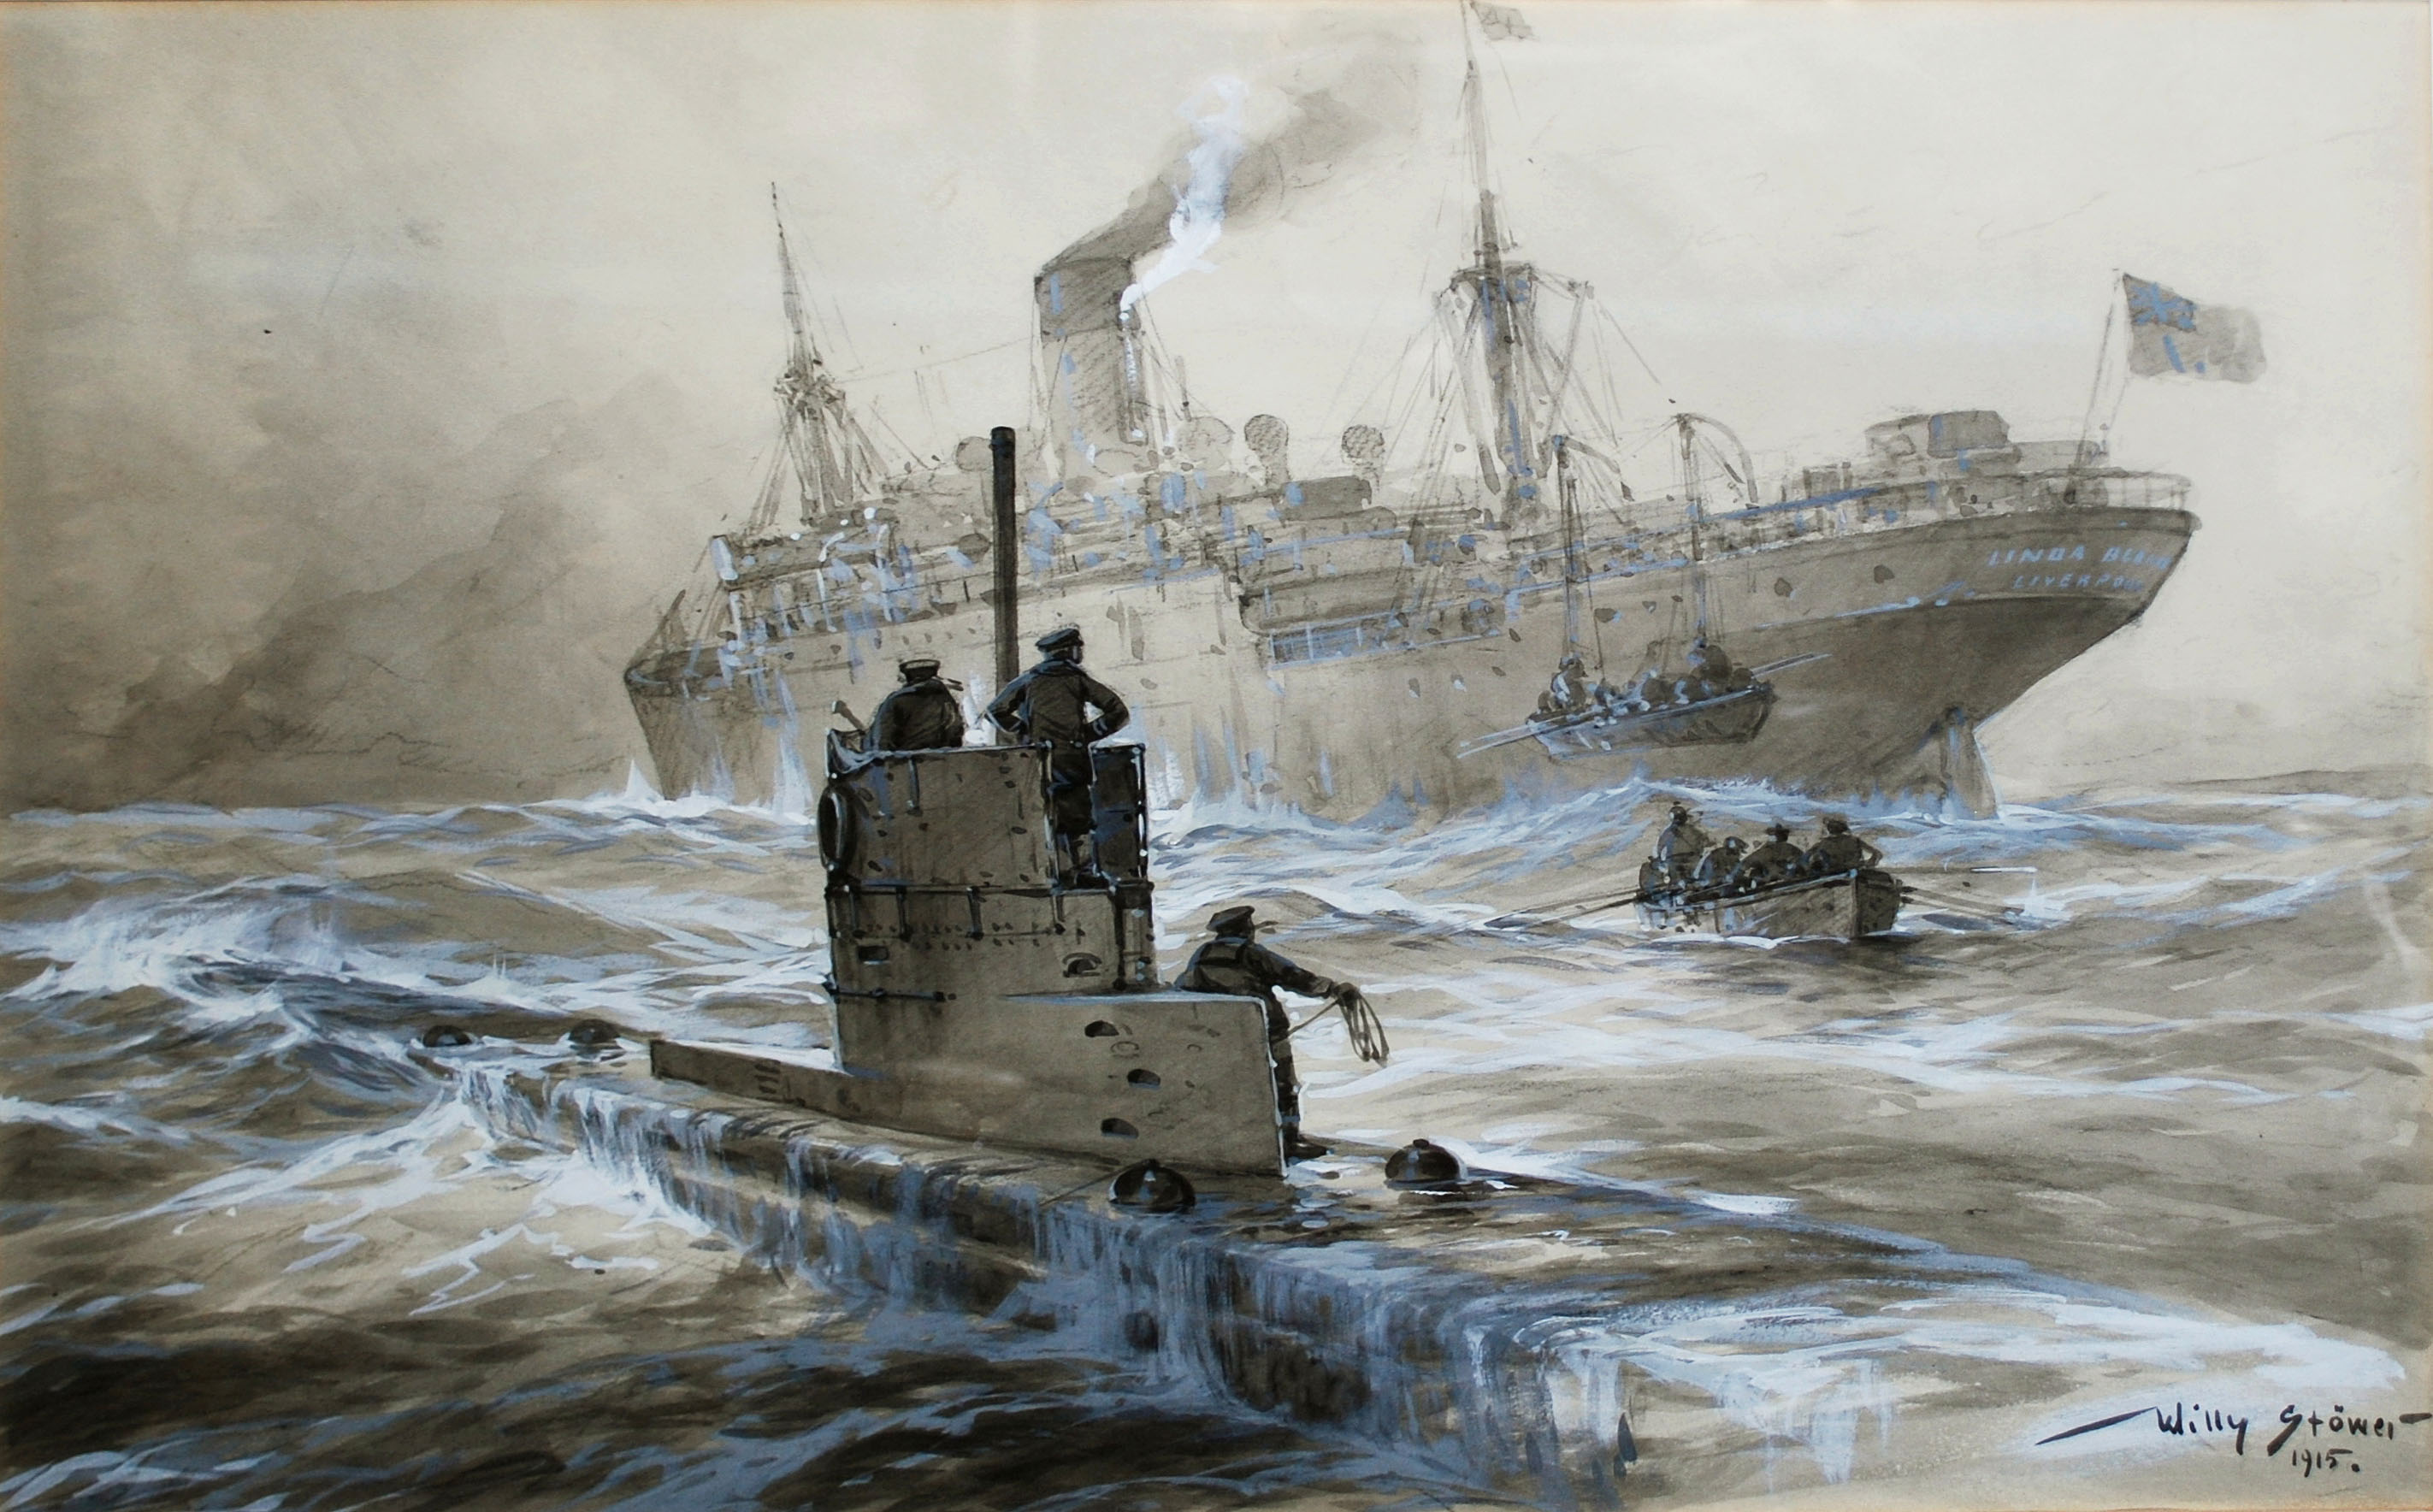 [WWI] Guerre Navale Willy_Sto%CC%88wer_-_Sinking_of_the_Linda_Blanche_out_of_Liverpool